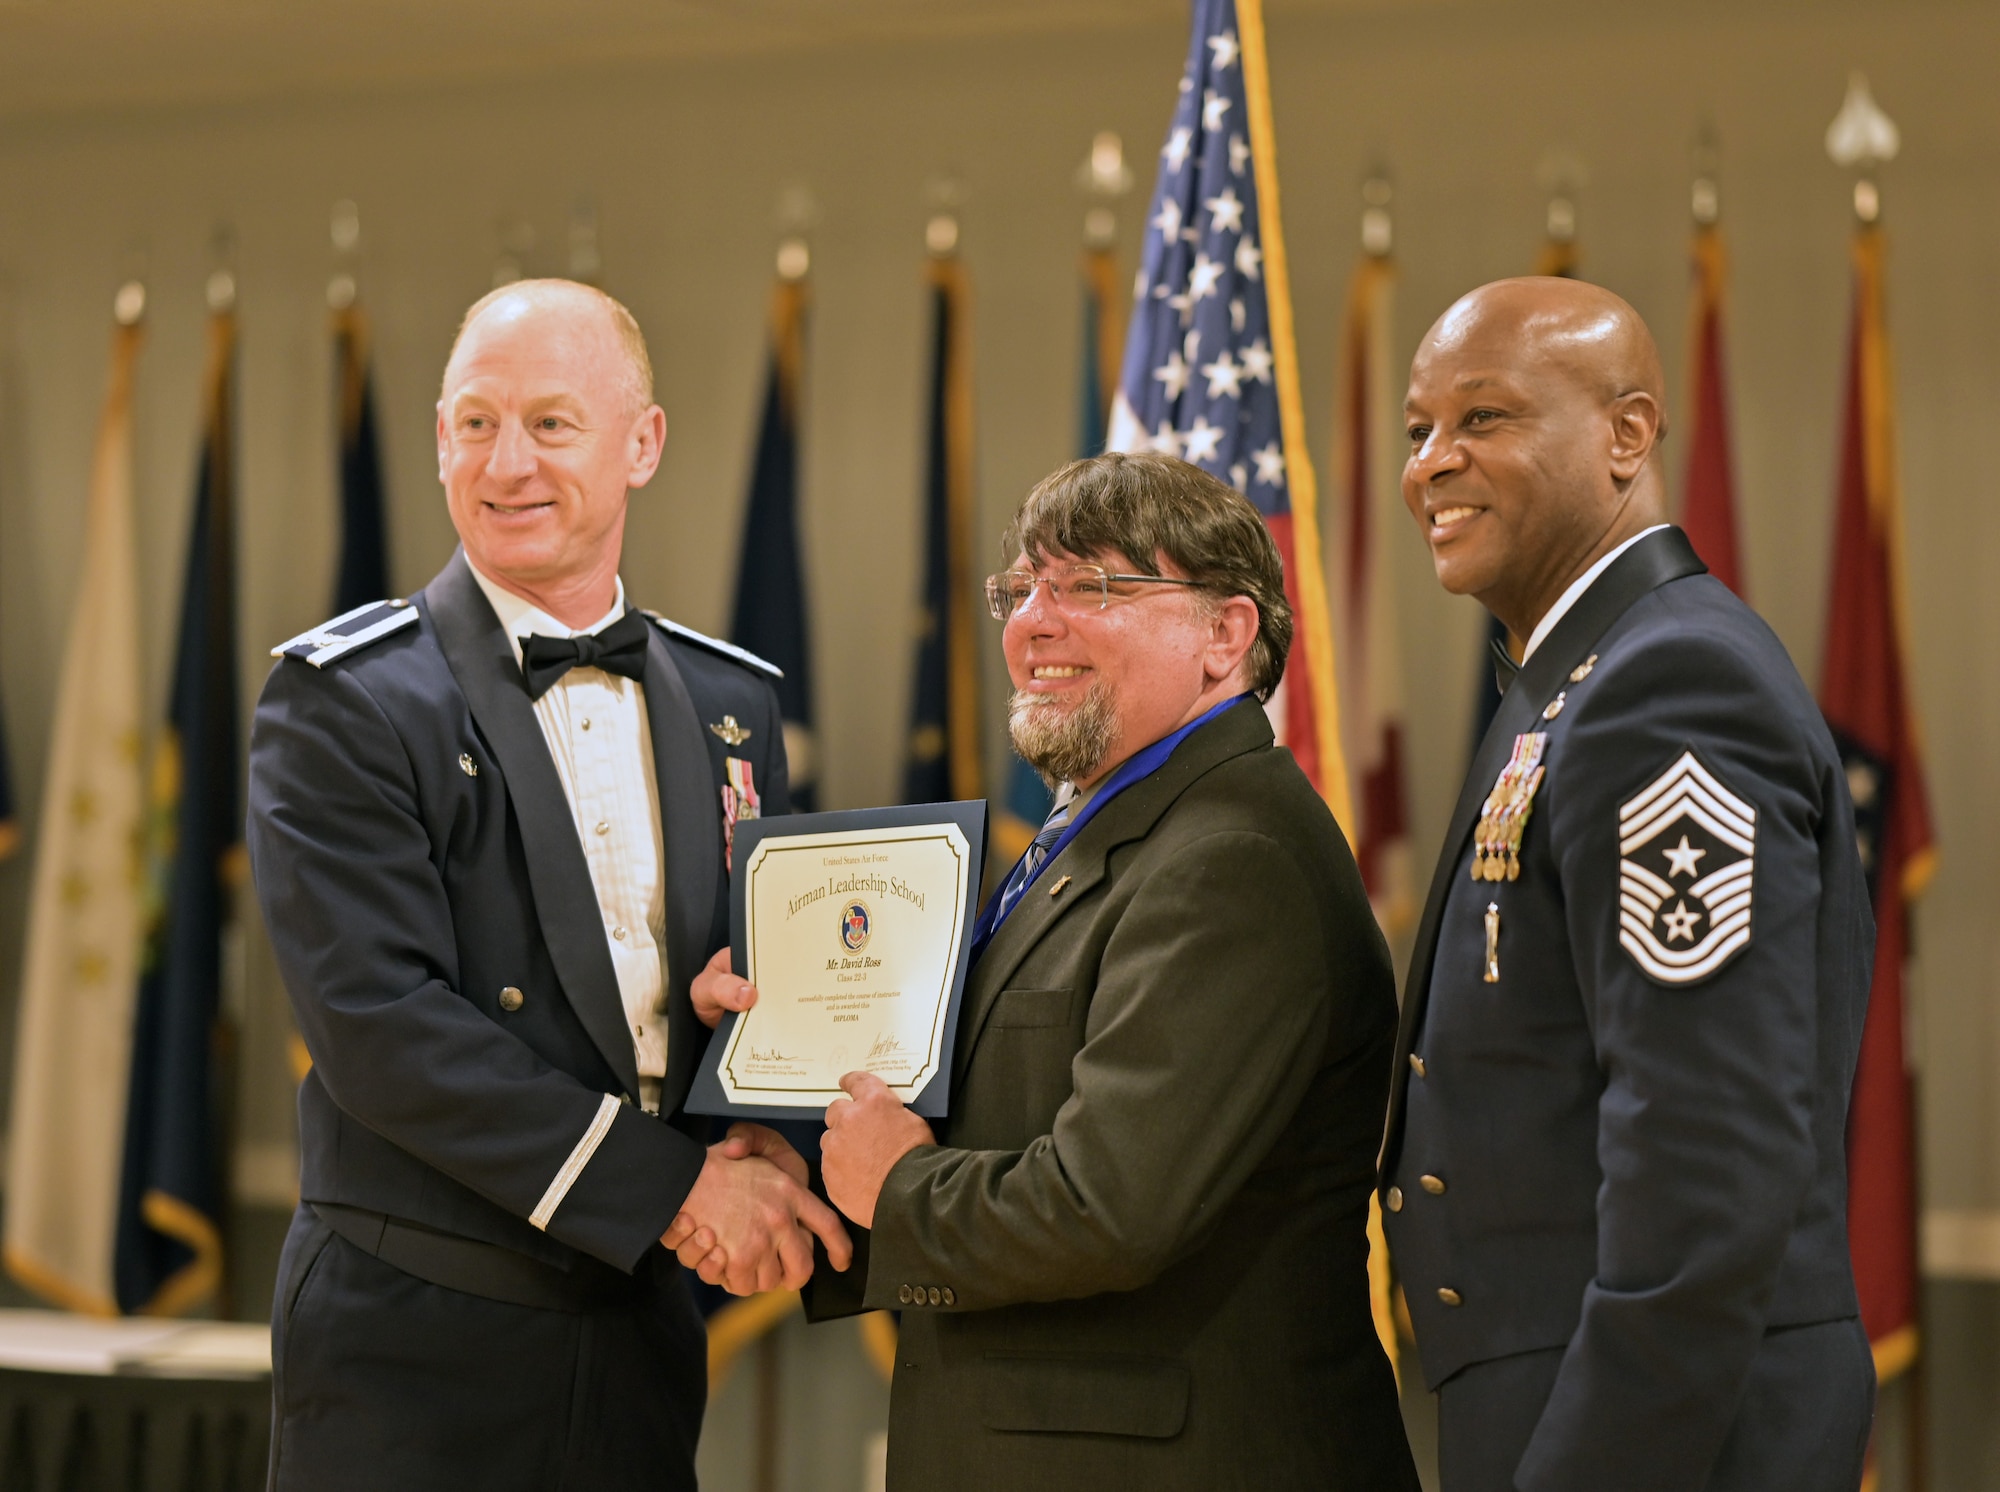 Col. Seth Graham, 14th Flying Training Wing commander, Chief Master Sgt. Antonio Cooper, 14th FTW command chief, pose for a photo with Mr. David Ross, 14th Medical Group optometry technician, at the Airman Leadership School graduation ceremony on March 31, 2022, at Columbus Air Force Base, Miss. Ross was the first civilian graduate from ALS. (U.S. Air Force photo by Senior Airman Davis Donaldson)